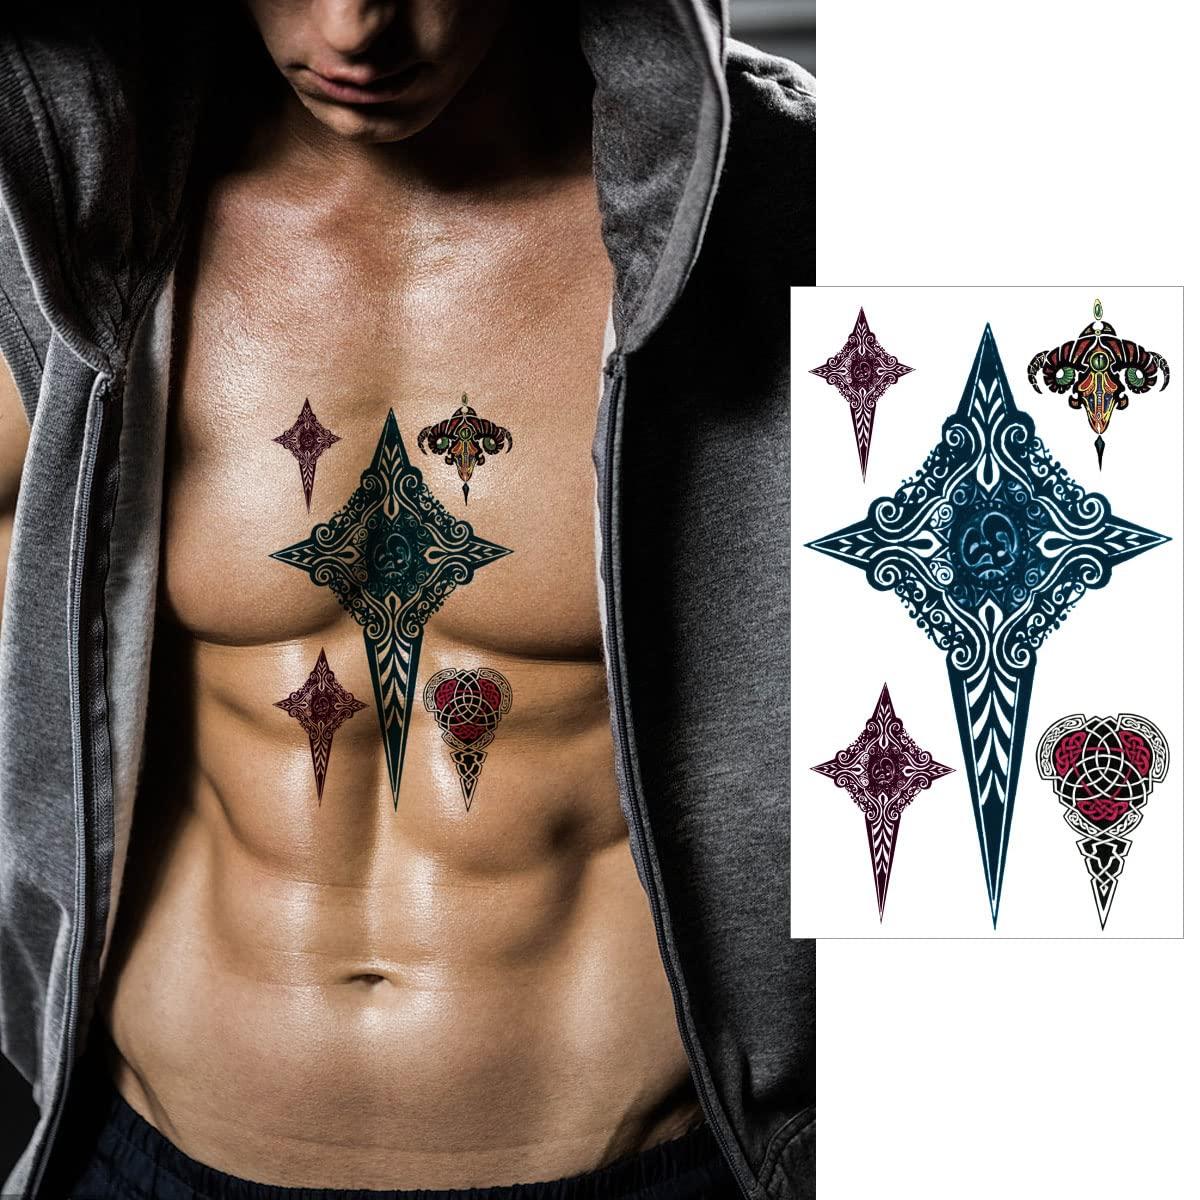 Large Tattoos Fake Temporary Body Art Stickers for Men Women Teens, VIWIEU  3D Realistic Girls Chest Temporary Tattoos, 5 Sheets, Water Transfer Body